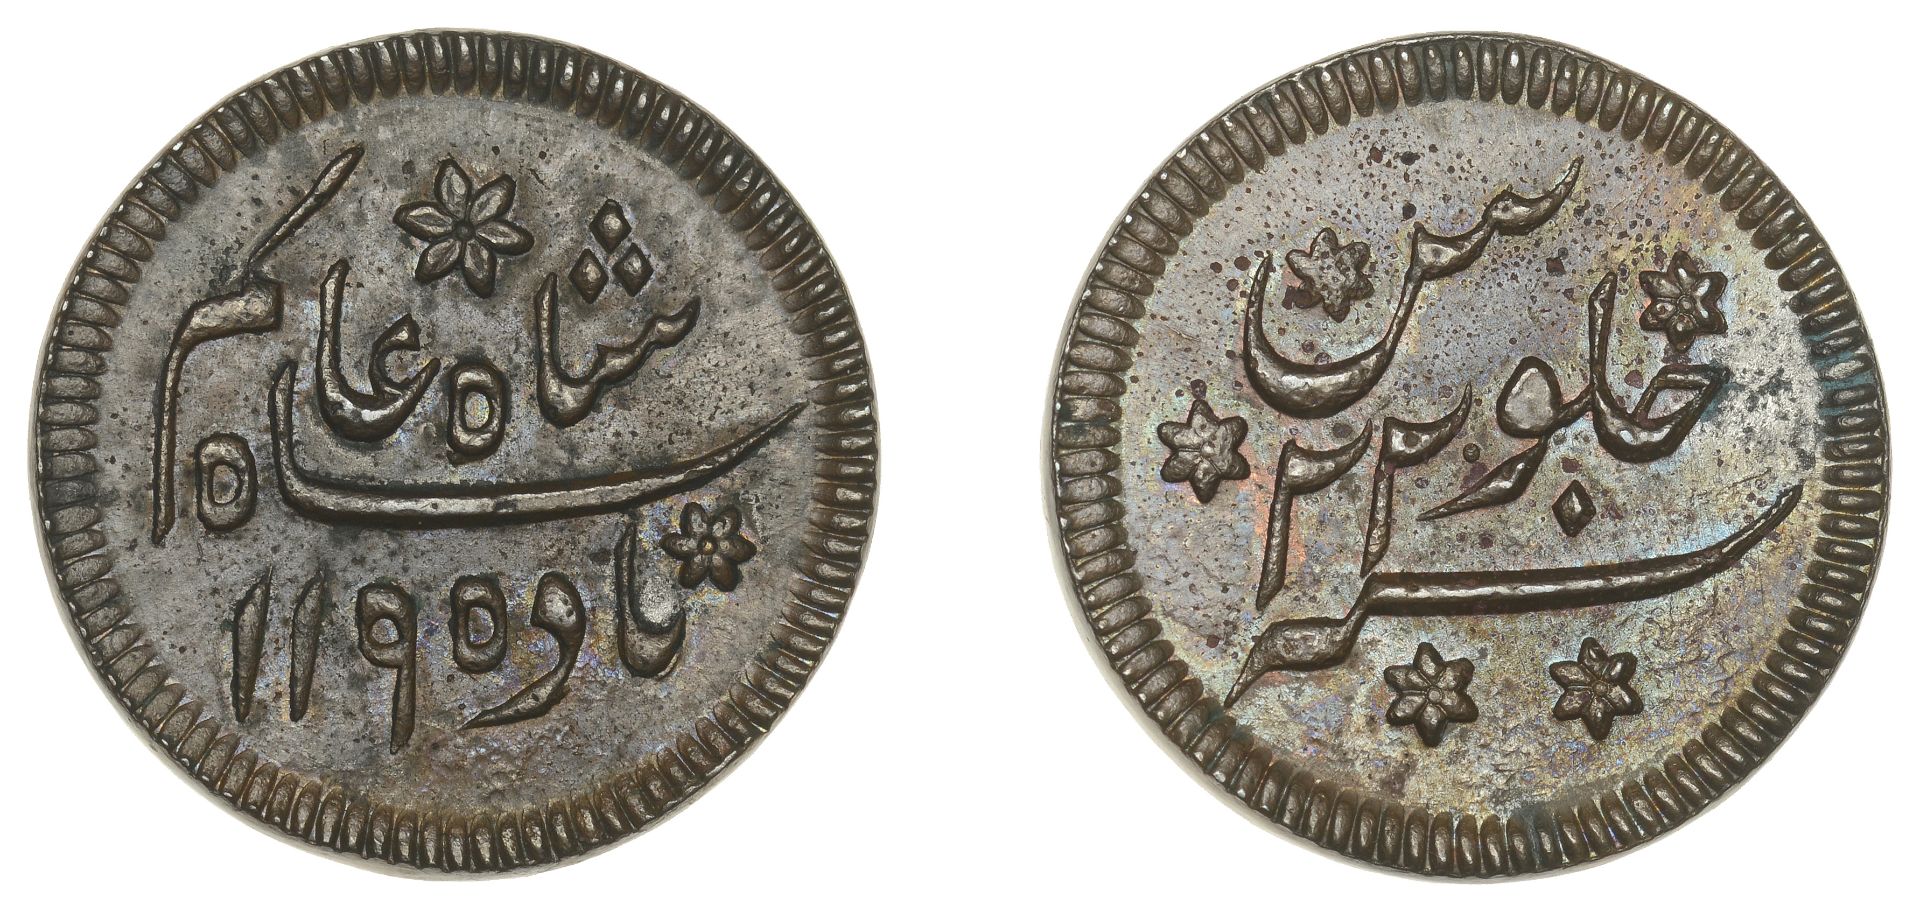 East India Company, Bengal Presidency, Pulta Mint: Prinsep's coinage, copper Pattern Madosie...